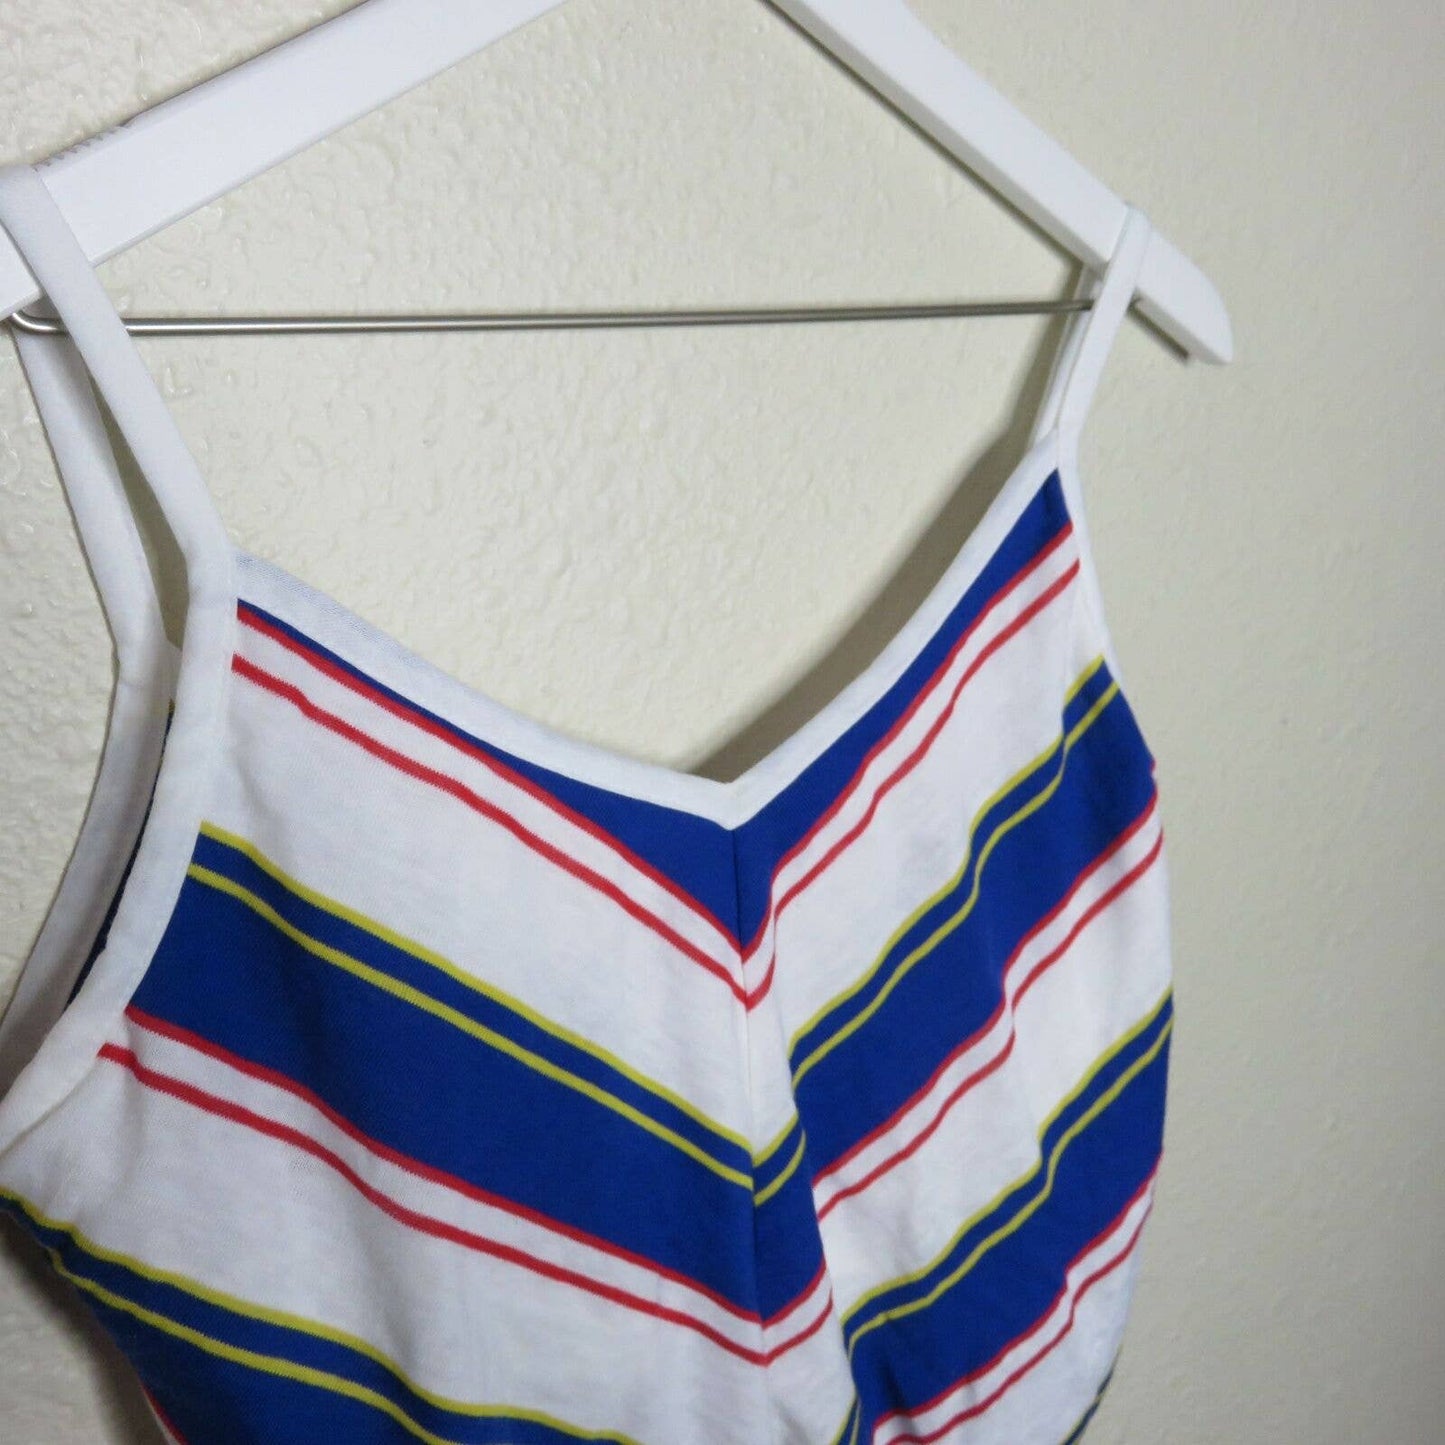 Vintage Chevron Pattern Primary Colors Tank Top Built In Bra Made in USA - Women's M